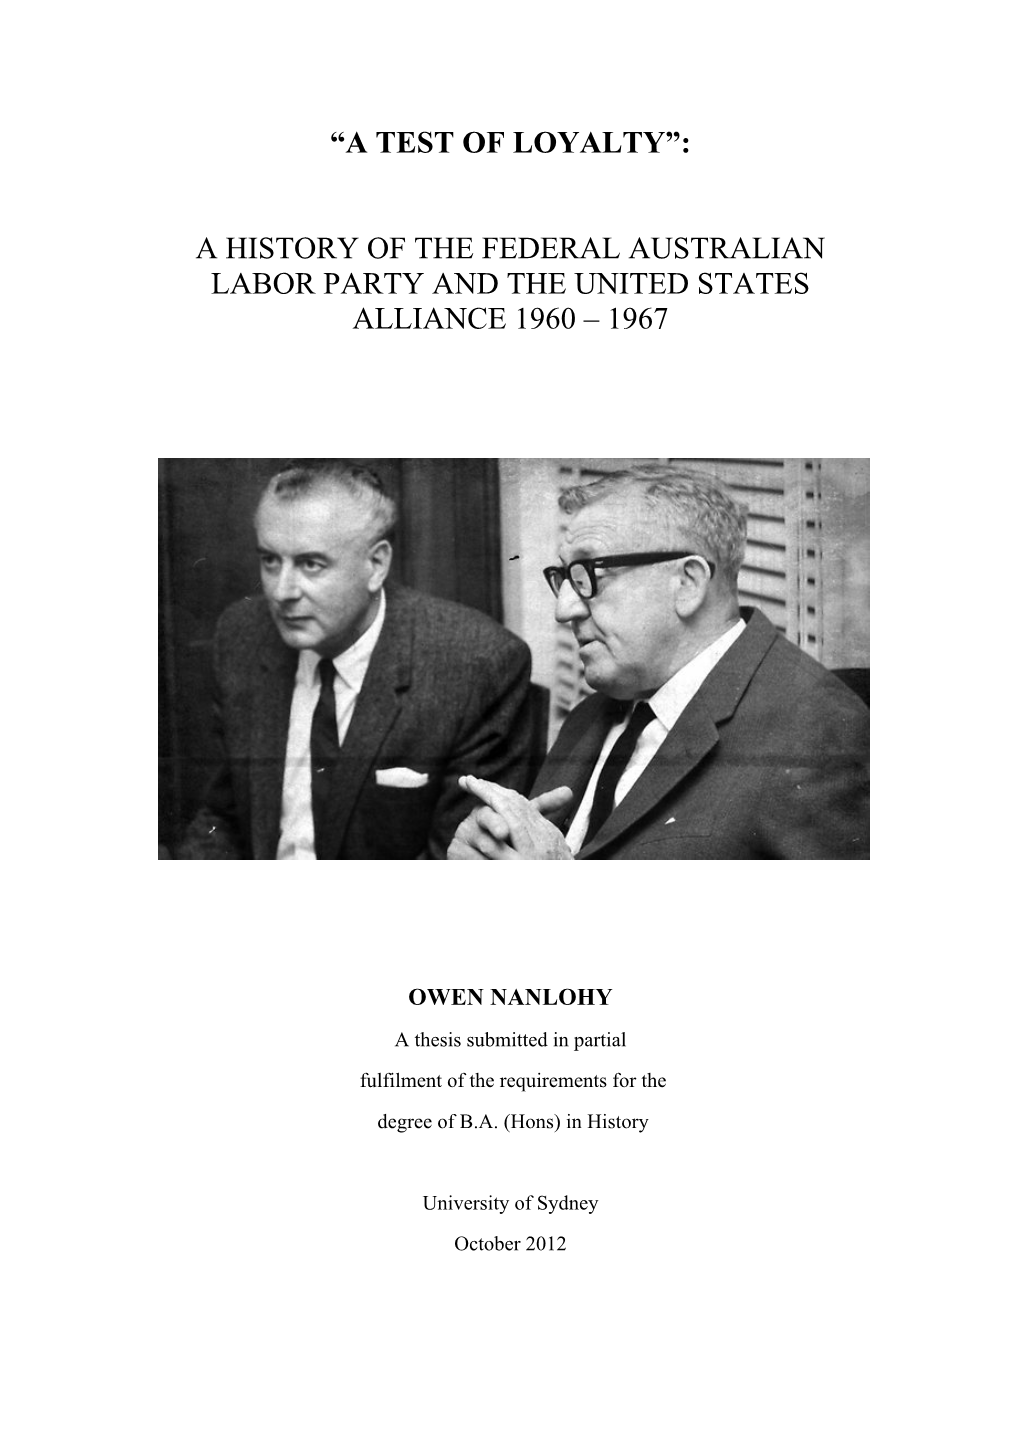 A History of the Federal Australian Labor Party and the United States Alliance 1960 – 1967